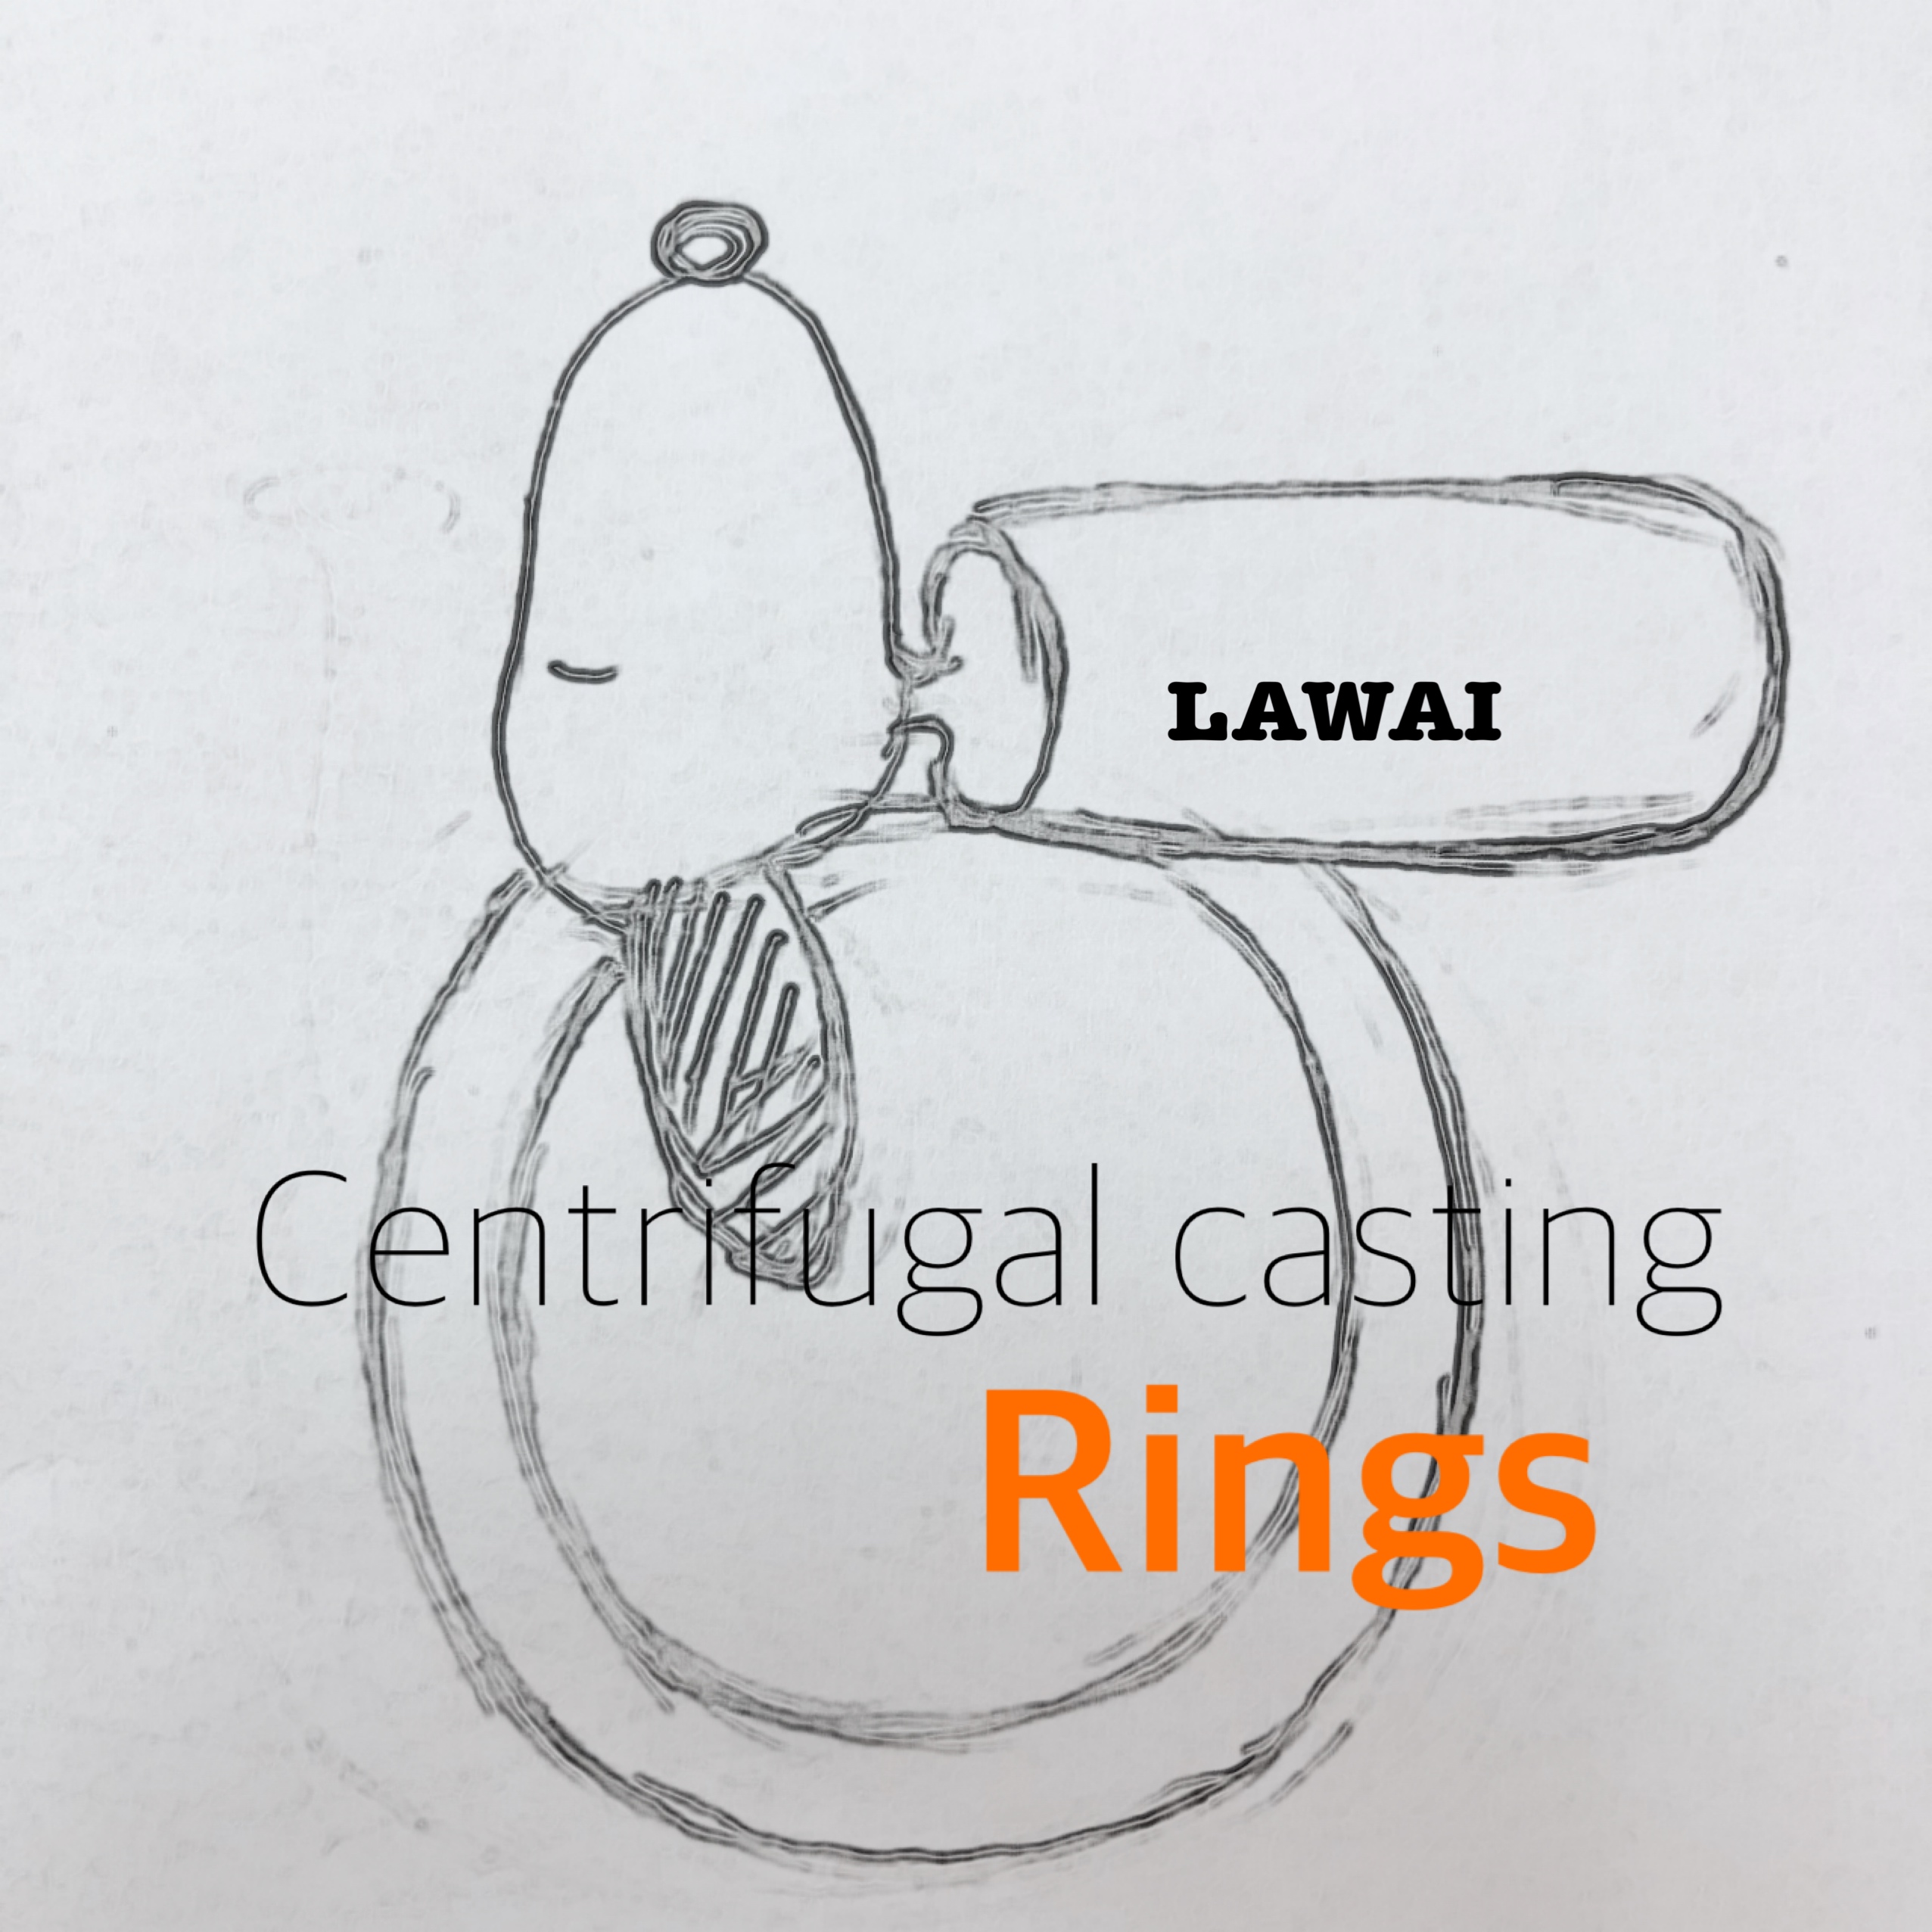 LAWAI INDUSTRIAL CORPORATION produces centrifugal casting ring in Taiwan